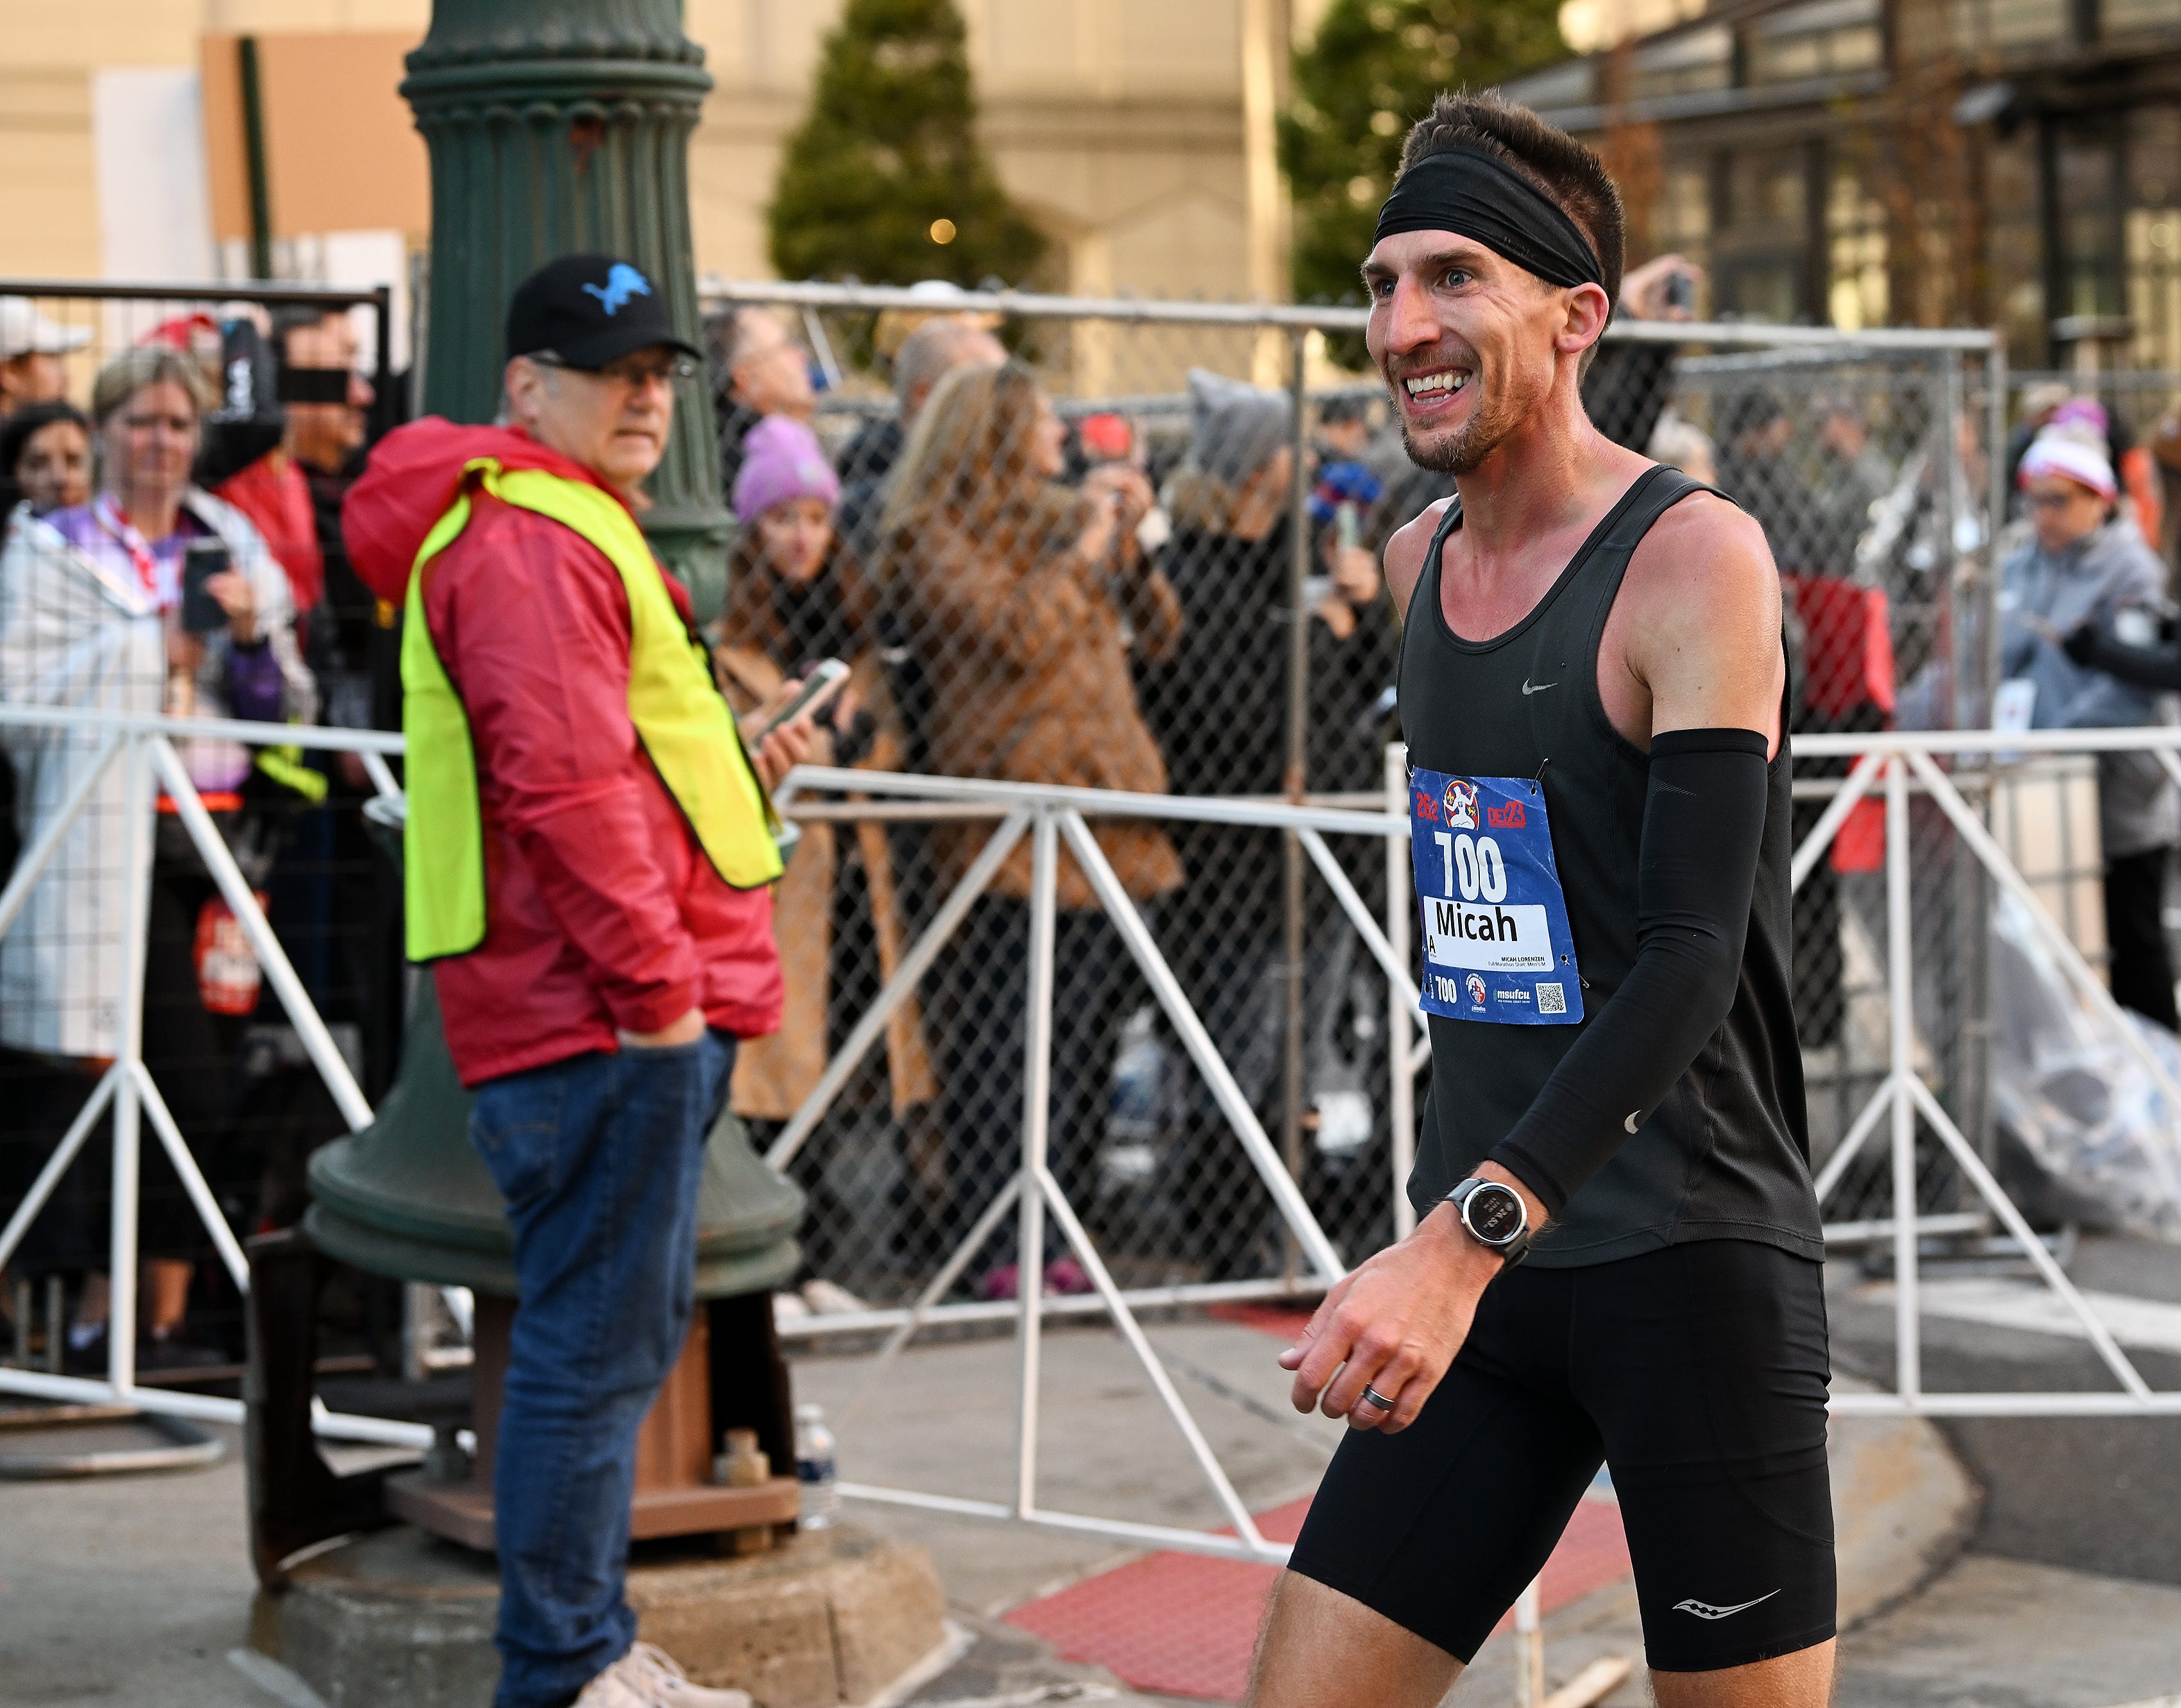 Micah Lorenzen, 37, of Livonia smiles after he finished fourth overall at the Detroit Free Press Marathon in Detroit on Oct. 15, 2023.